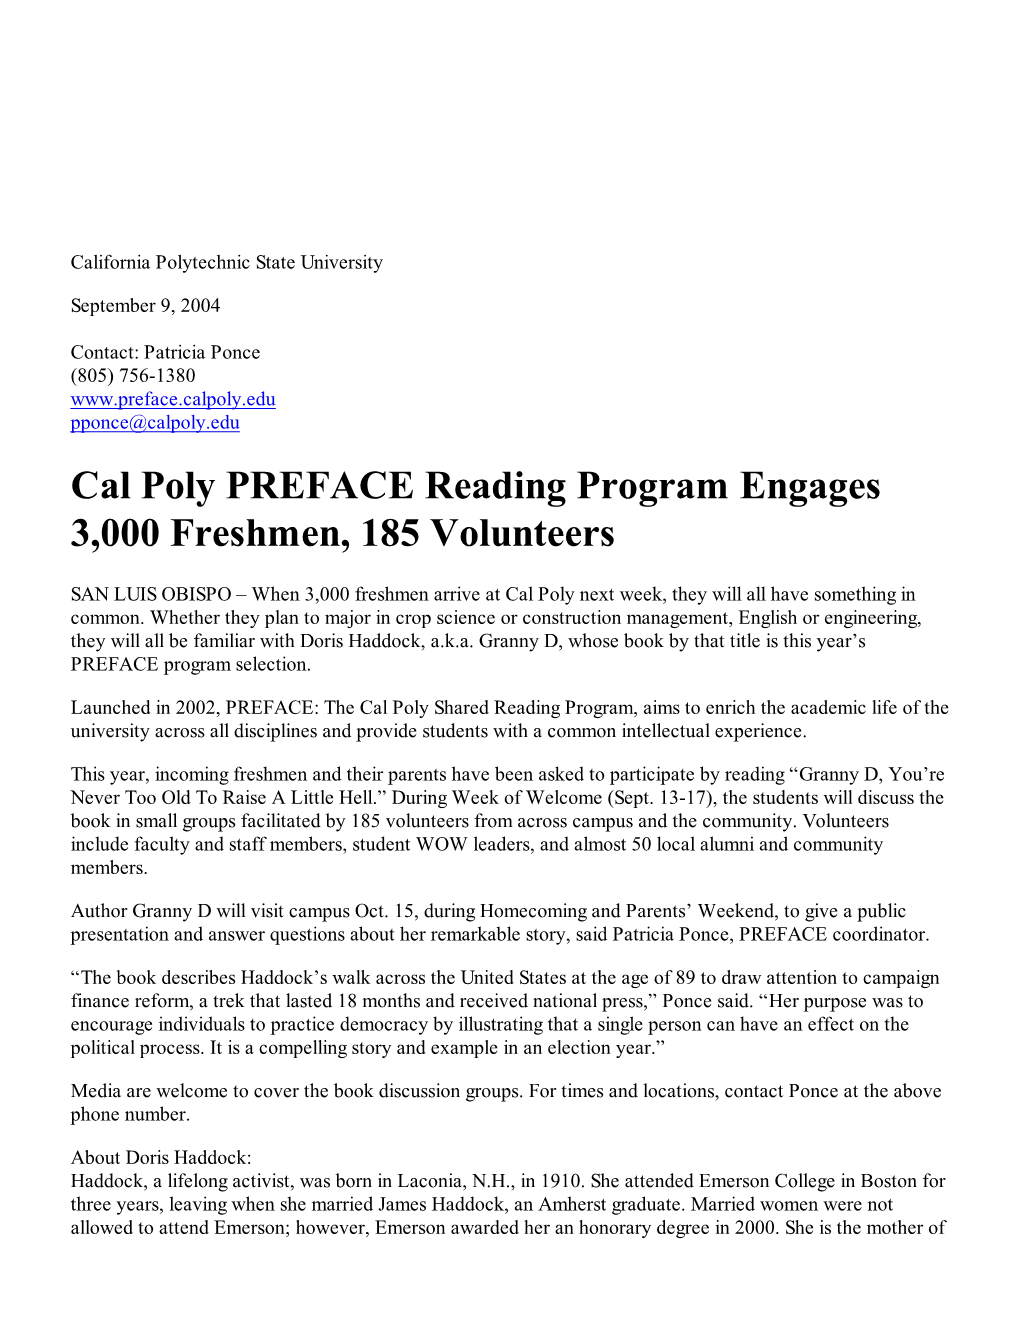 Cal Poly PREFACE Reading Program Engages 3,000 Freshmen, 185 Volunteers